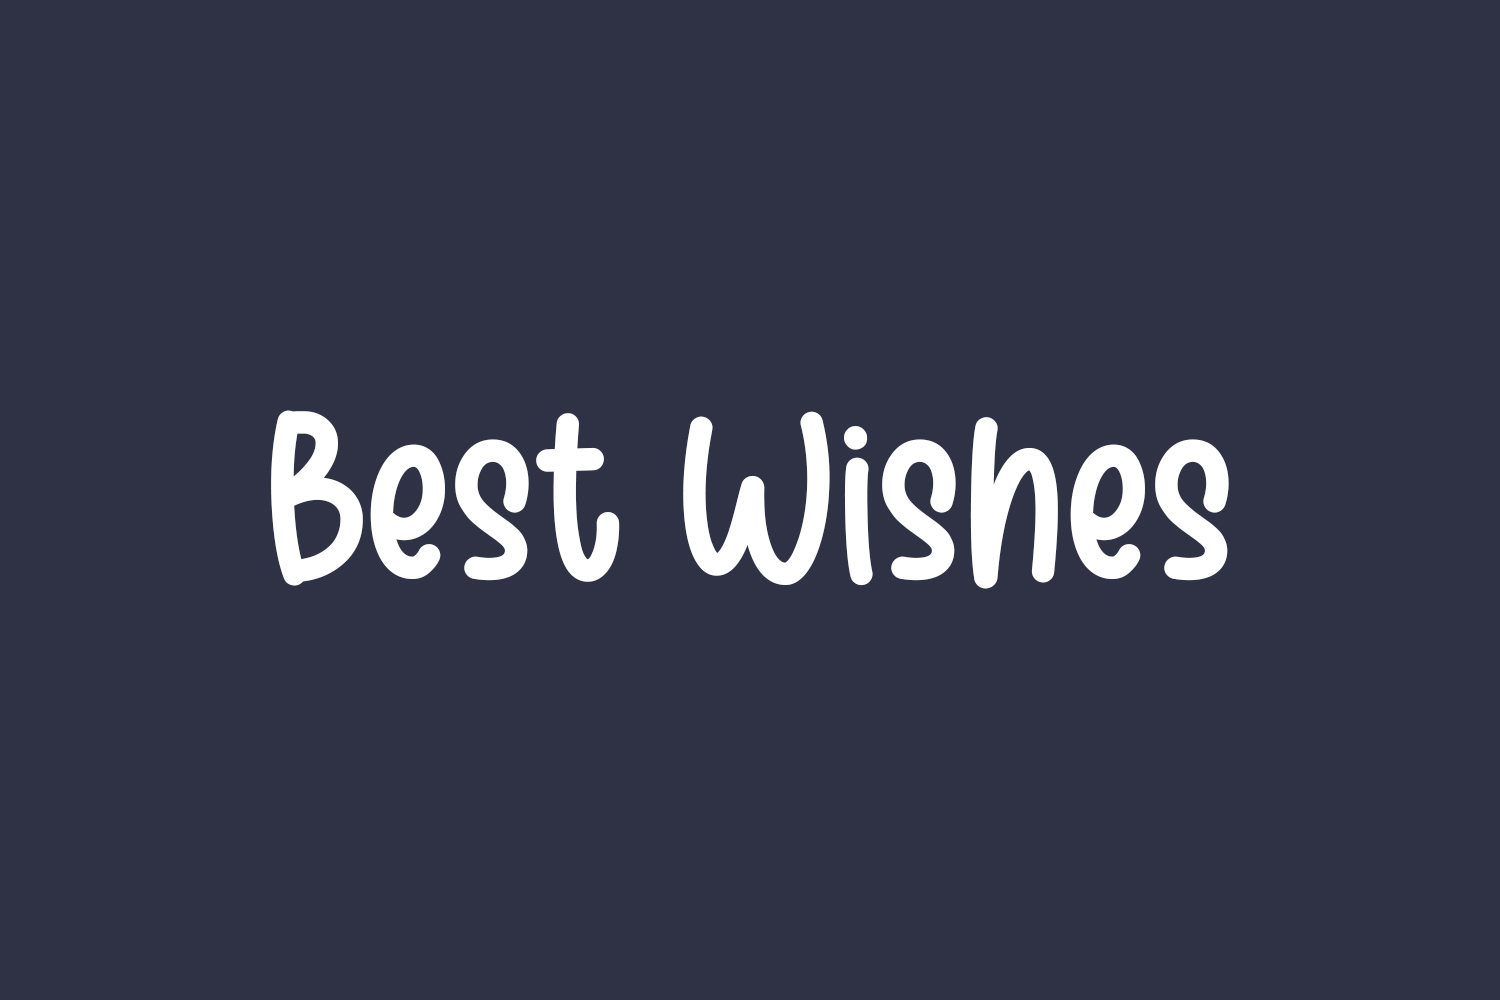 Best Wishes Free Font